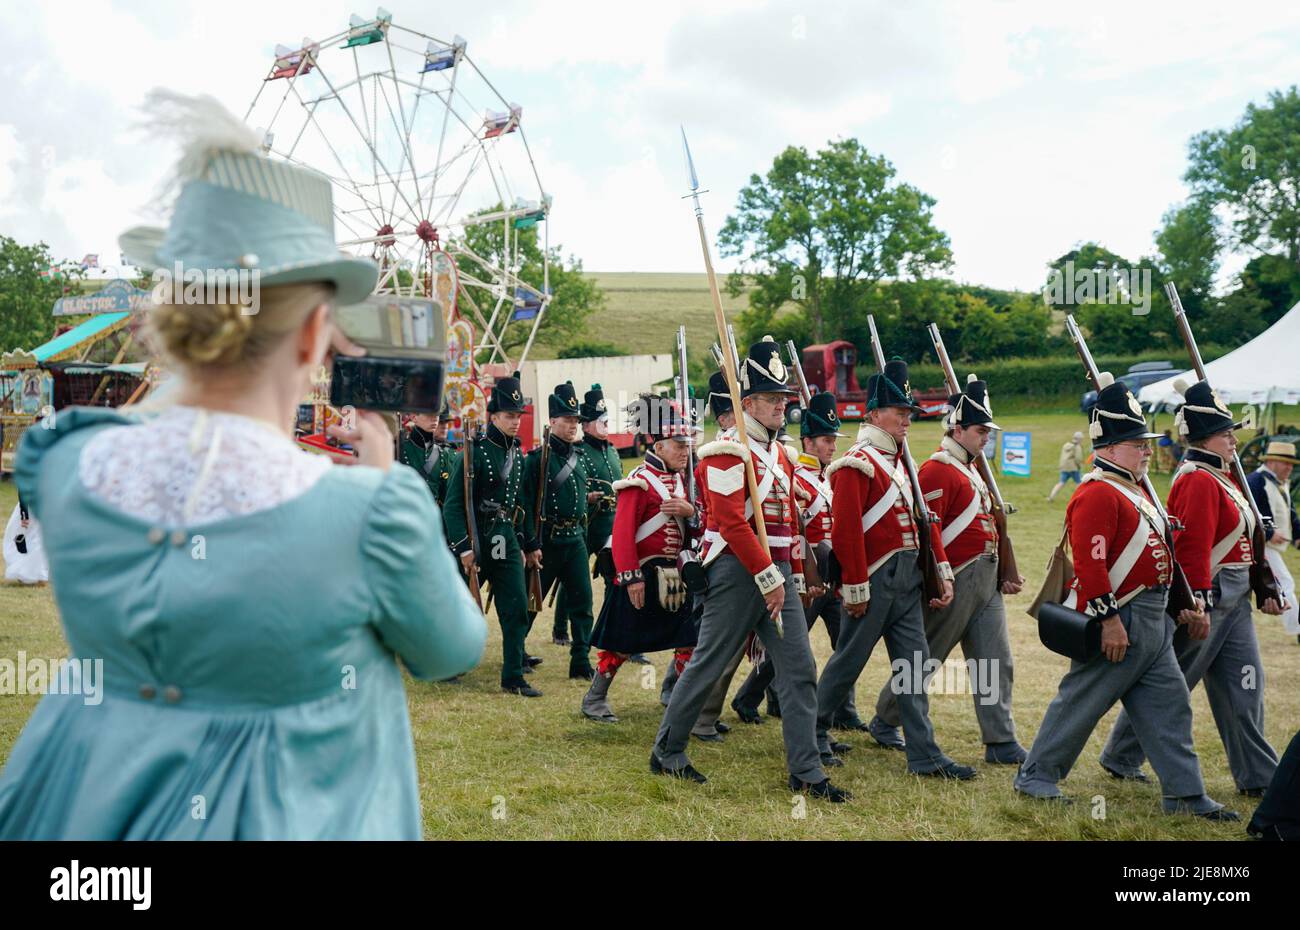 A person takes a photo as members of the 4th King's Own Regiment of Foot and 2nd Battalion 9th Rifles parade around the festival ground during the Chalke Valley History festival at Broad Chalke, Near Salisbury, Wiltshire. Picture date: Sunday June 26, 2022. Stock Photo